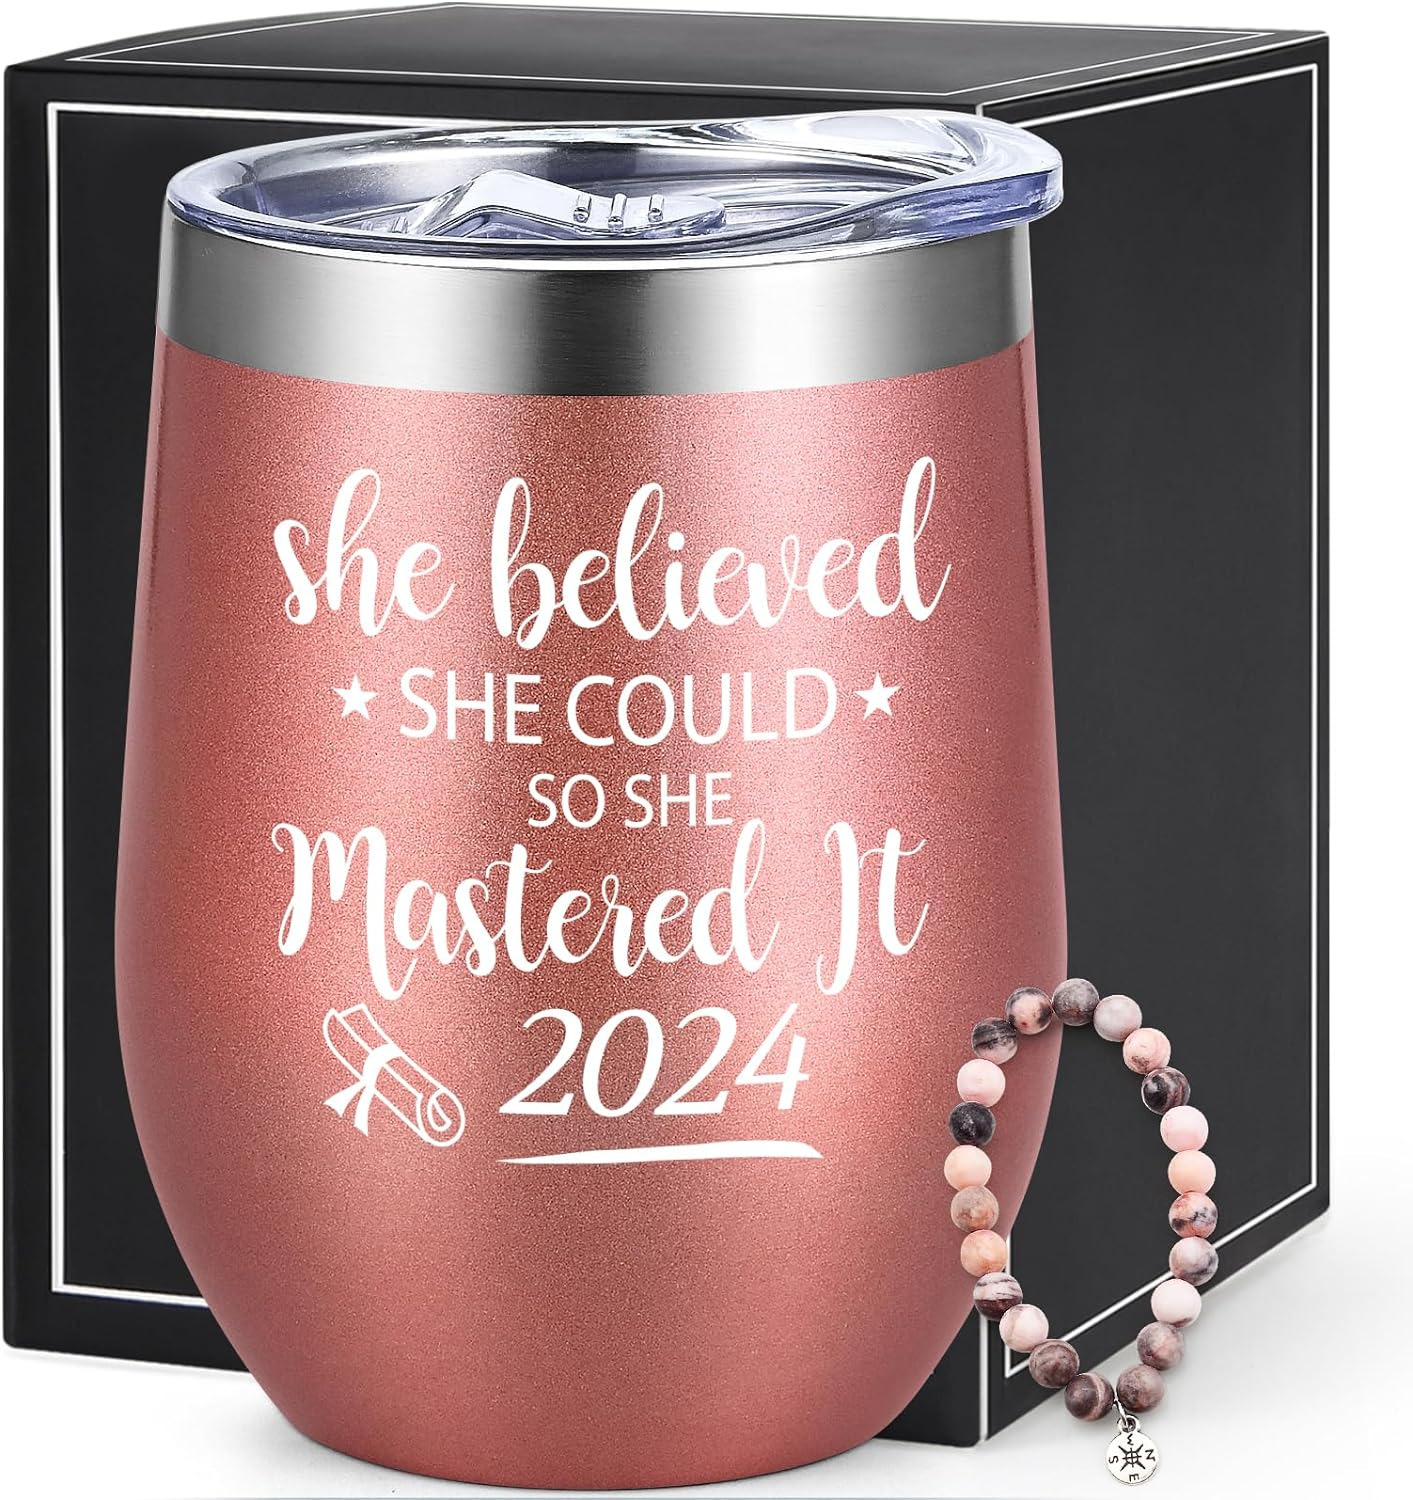 2024 Graduation Gifts, College Masters Degree Senior Graduation Gifts for Her Wo